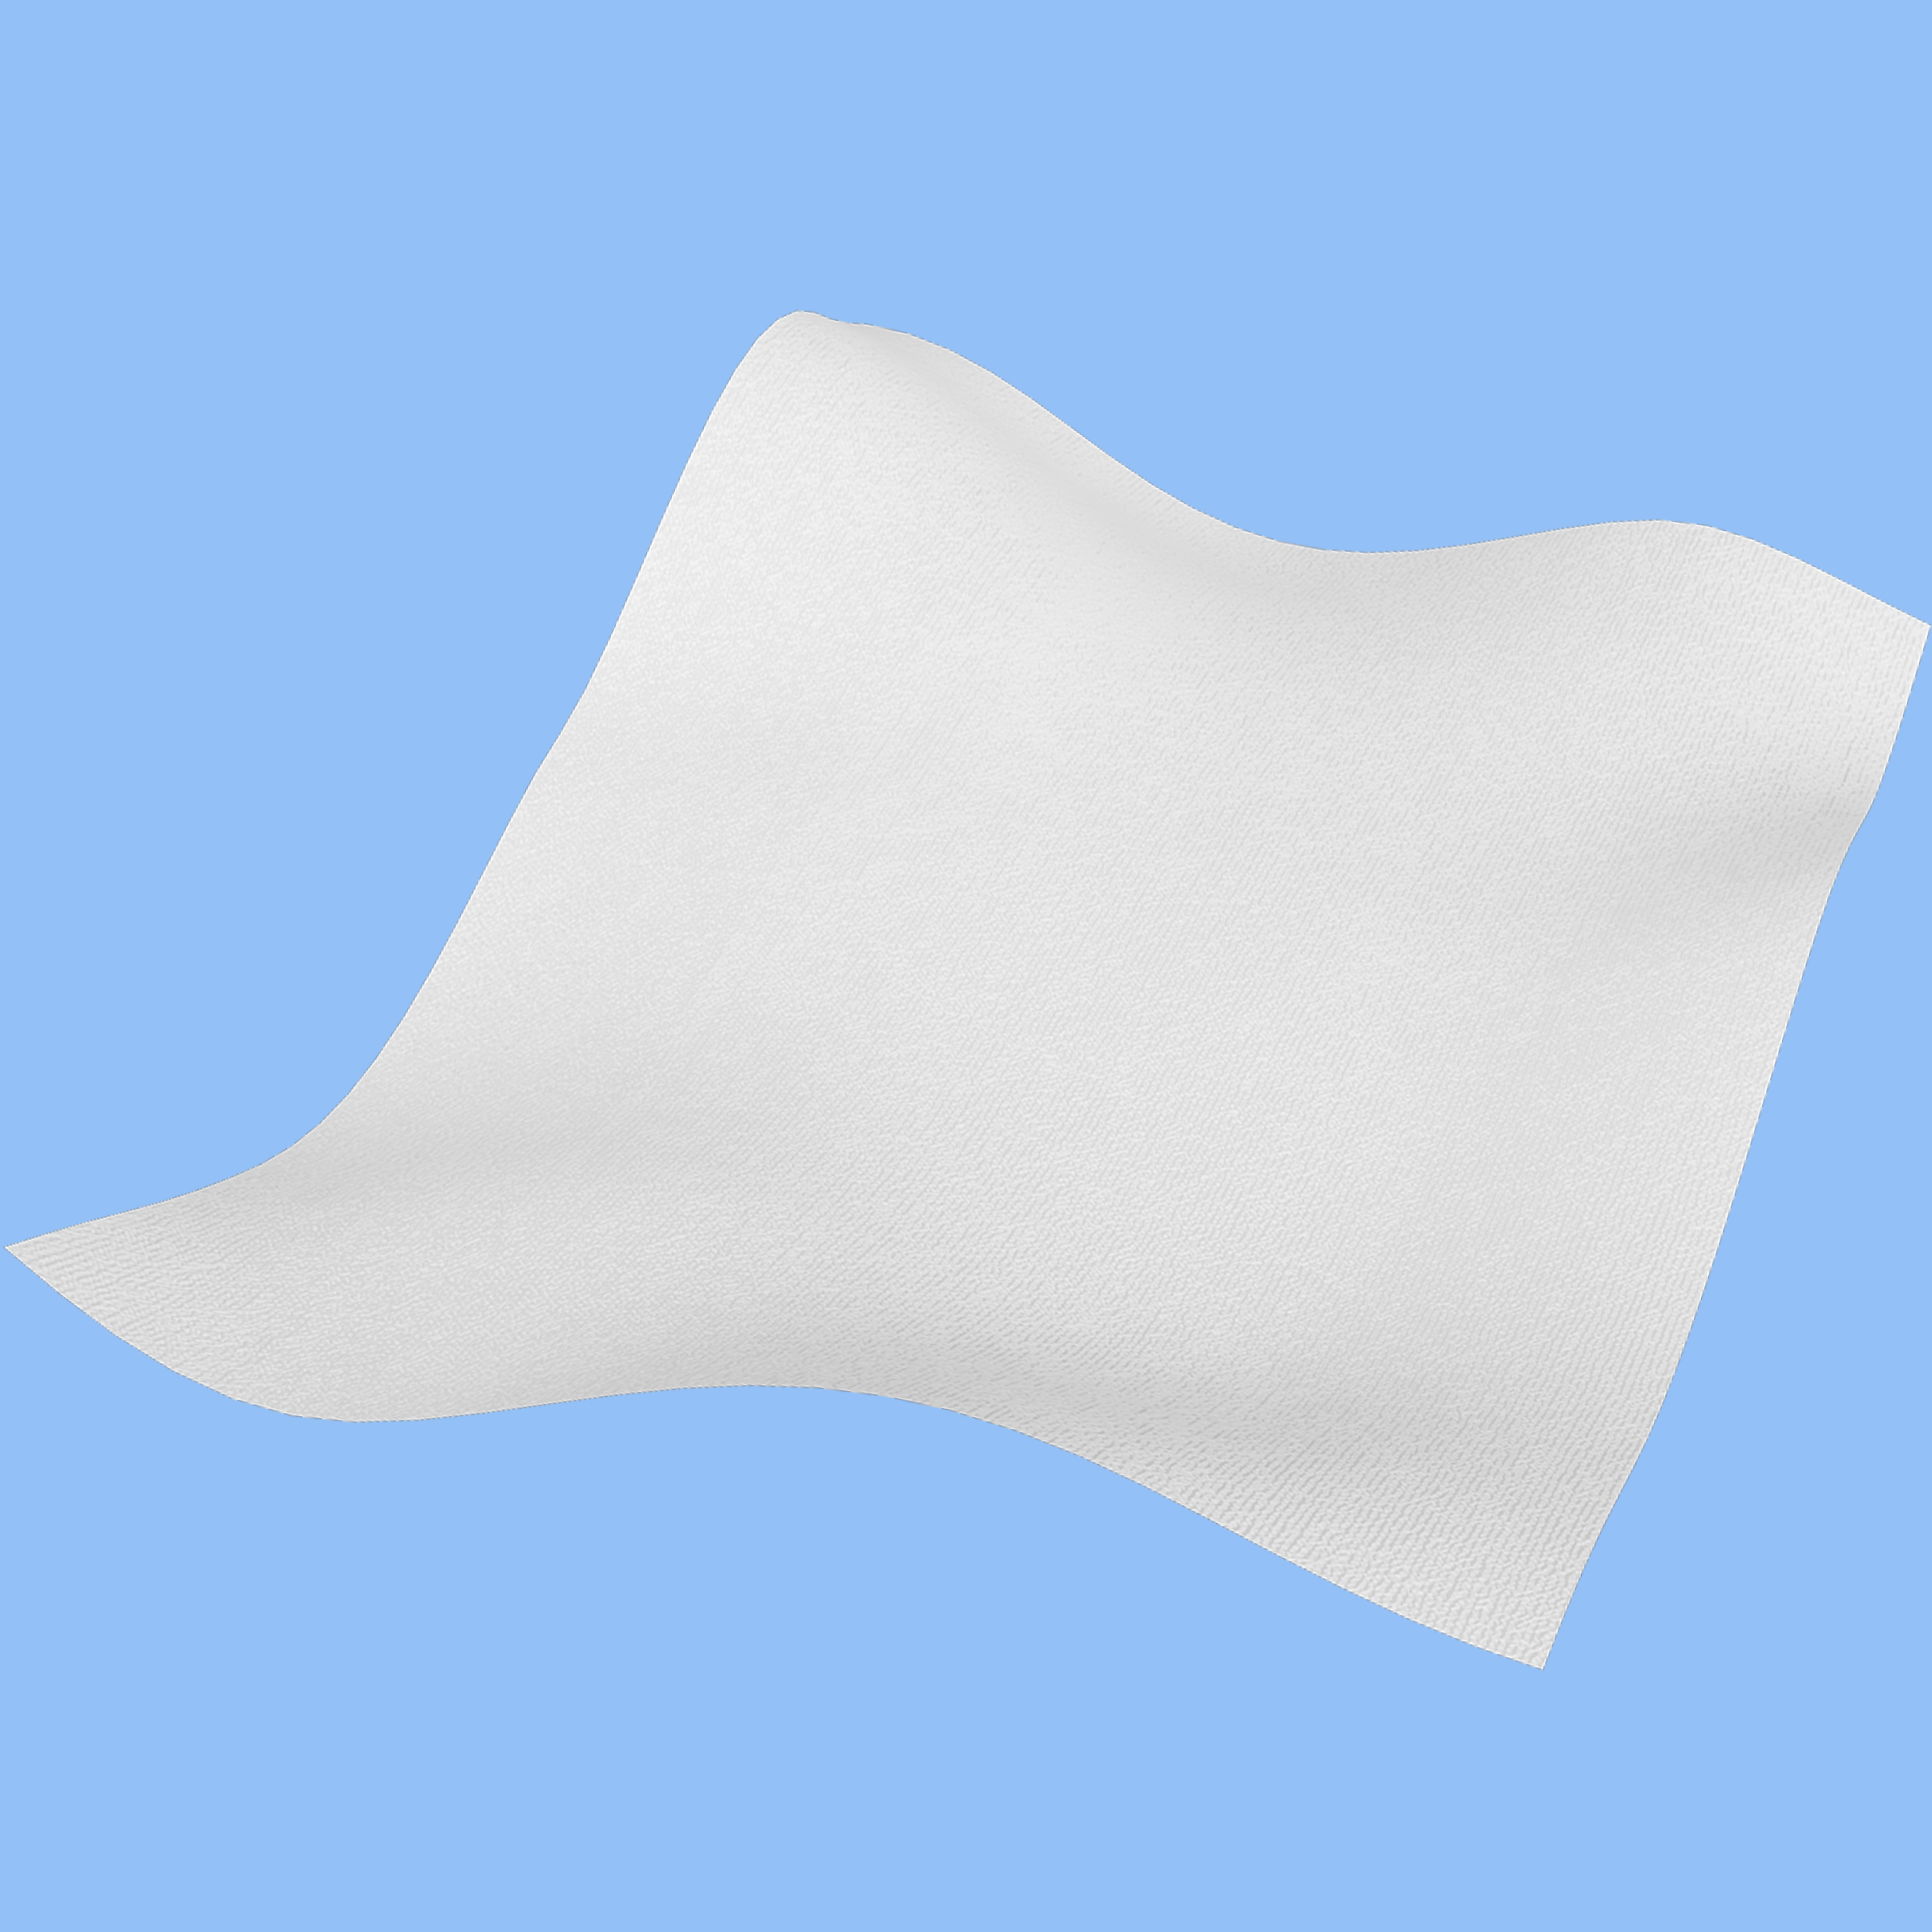 Polyester viscose spunlace nonwoven for wet wipes